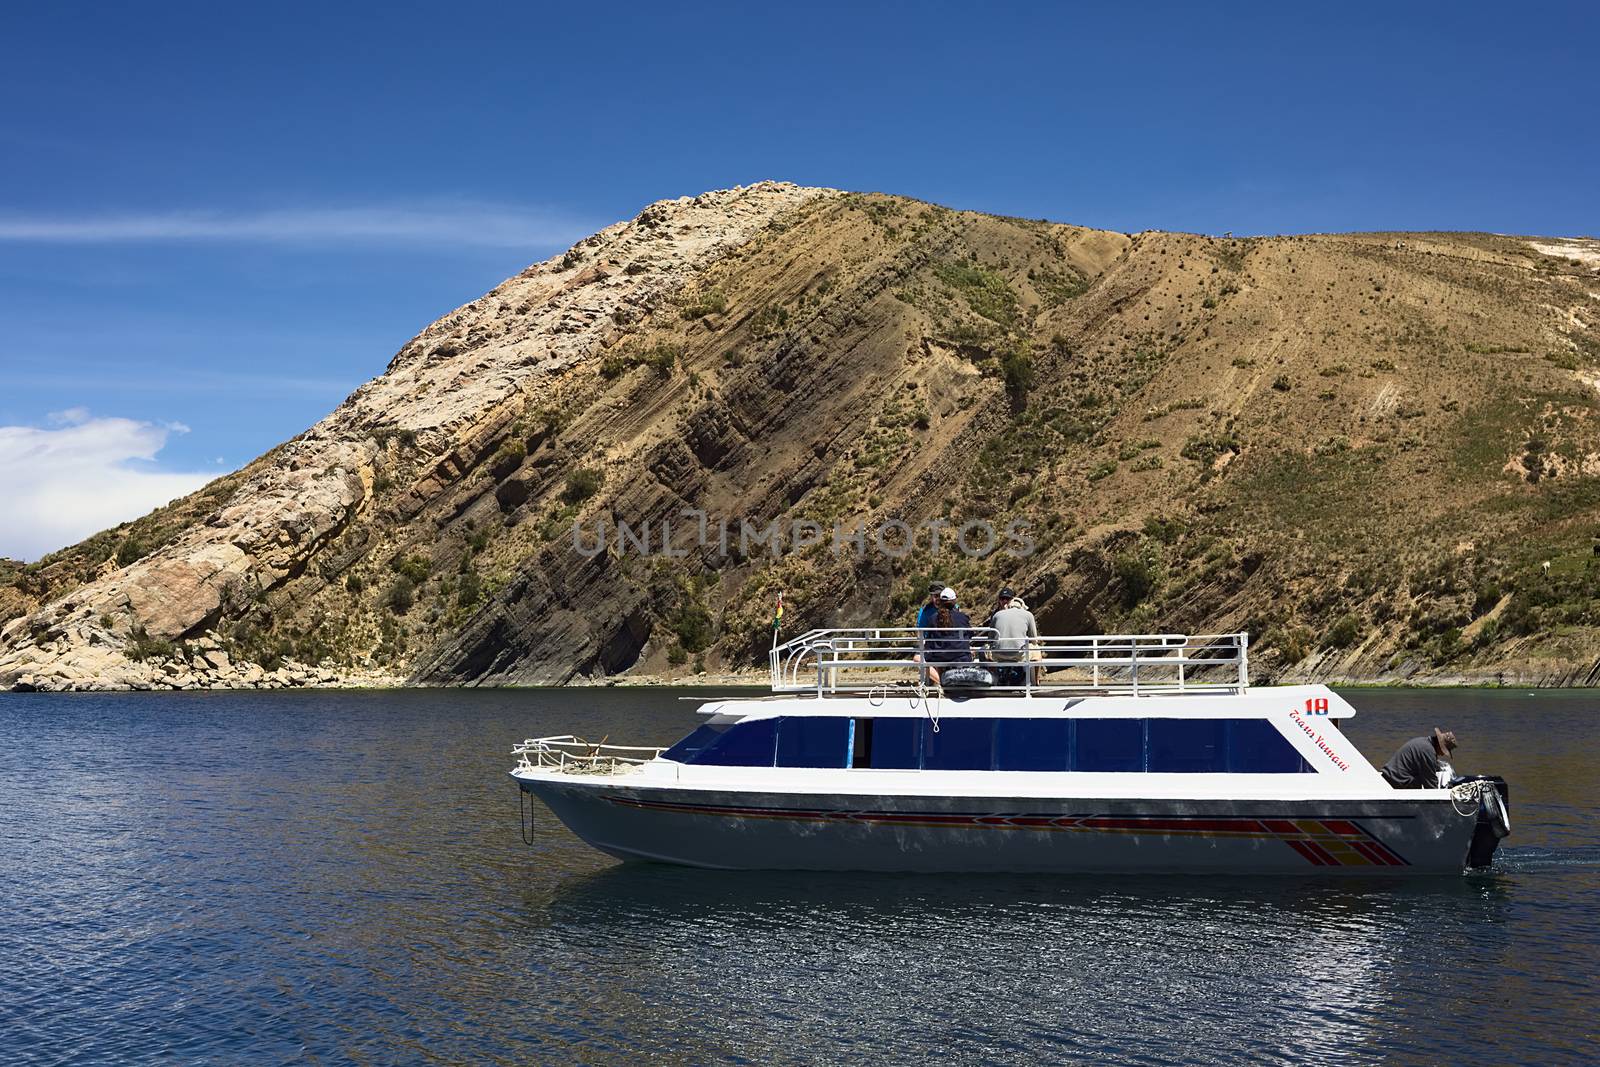 ISLA DEL SOL, BOLIVIA - NOVEMBER 6, 2014: Unidentified people sitting on the roof of a tour boat leaving the Isla del Sol (Island of the Sun) on November 6, 2014 at Isla del Sol, Bolivia. Isla del Sol is a popular tourist destination in Lake Titicaca.  